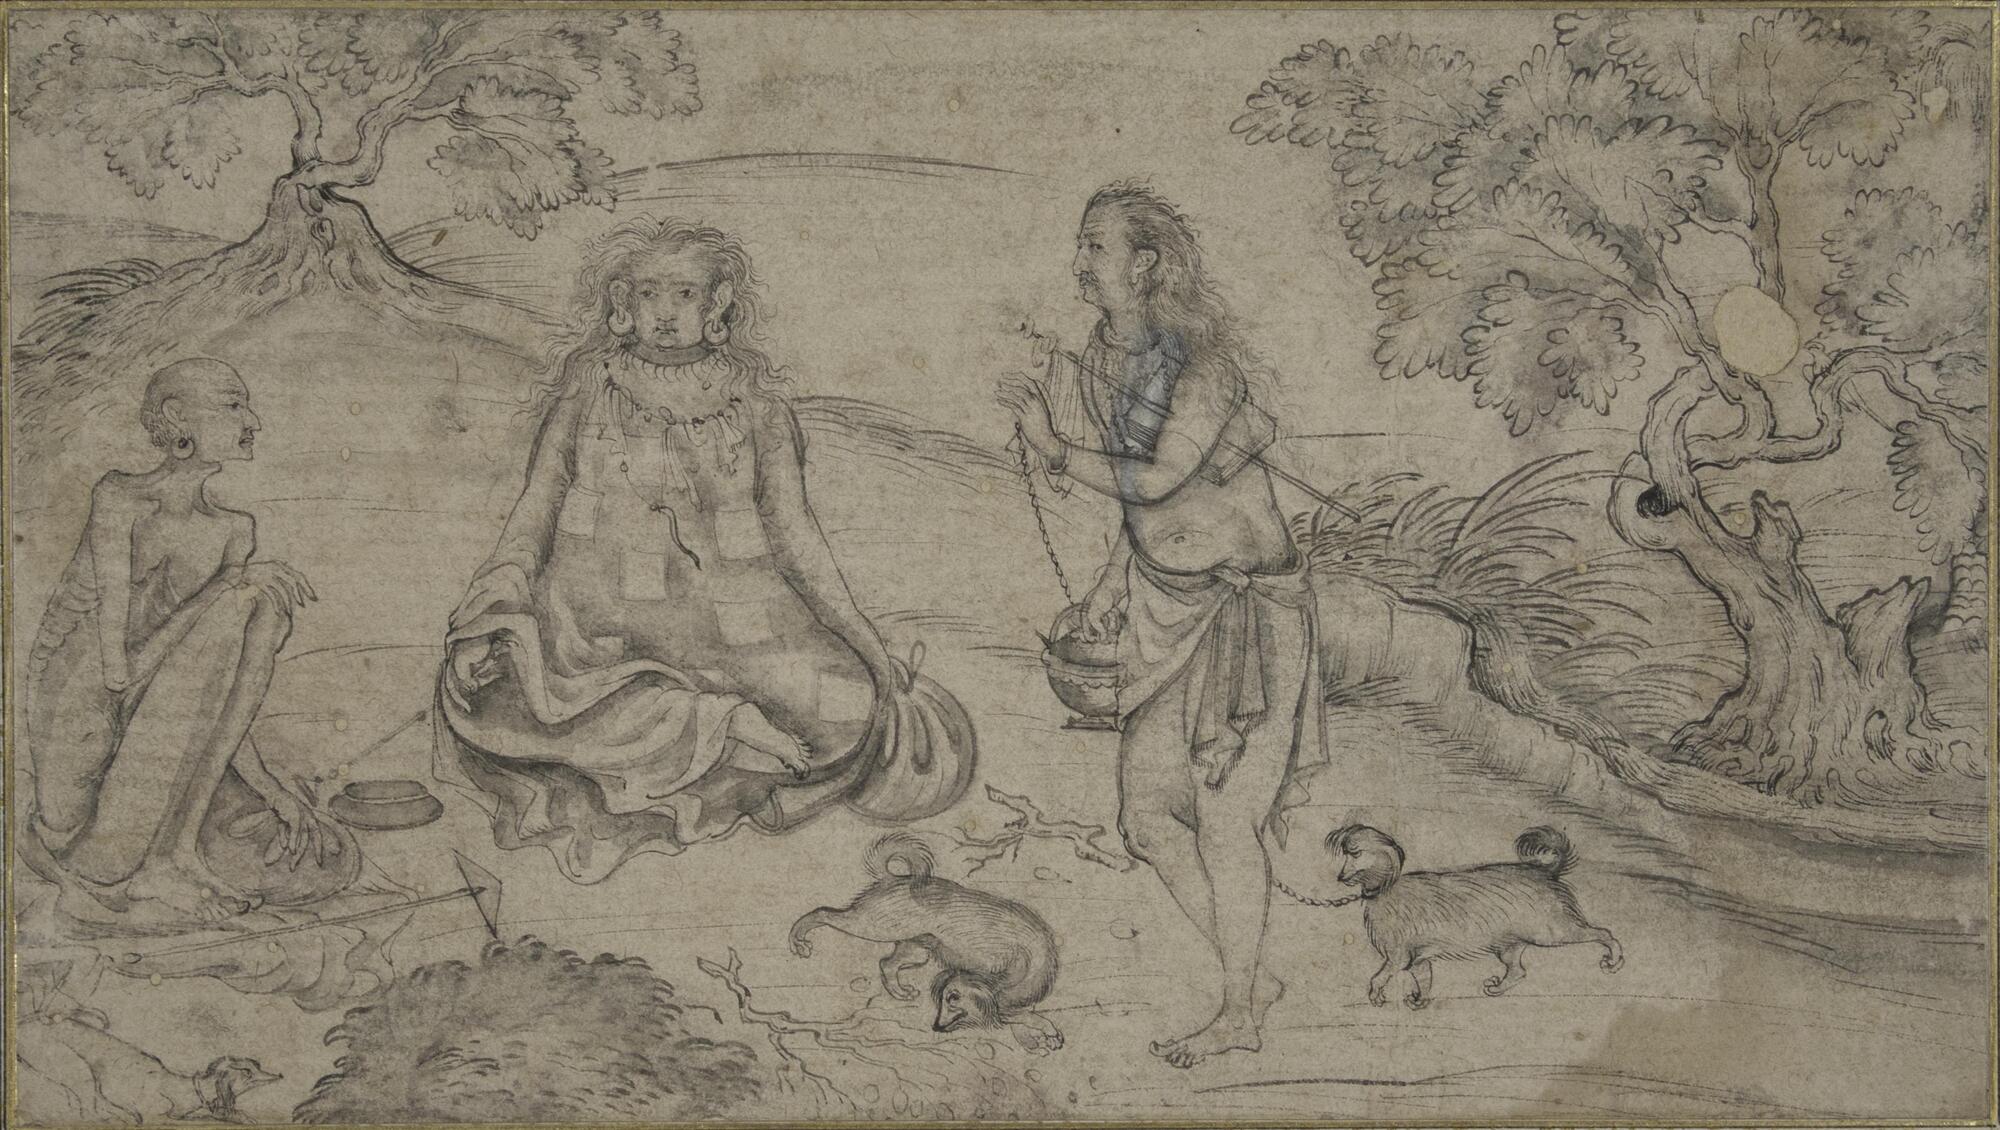 The drawing is mounted on an album page of a yellowish color flecked with gold.  There is a narrow frame in a slighter lighter tone outlined with gold and red lines.  The main figure sits facing the viewer and is in a long robe.  An emaciated, nearly nude figure faces him squatting with his hand on one knee.  Another ascetic stands and offers obeisance to the master.  One dog rolls around in front of him and another on a leash walks behind him.  There is a clump of bushes to the lower left and a tree to the upper left tops a diagonal leading down to the right with a large group of twisted trees. <br />